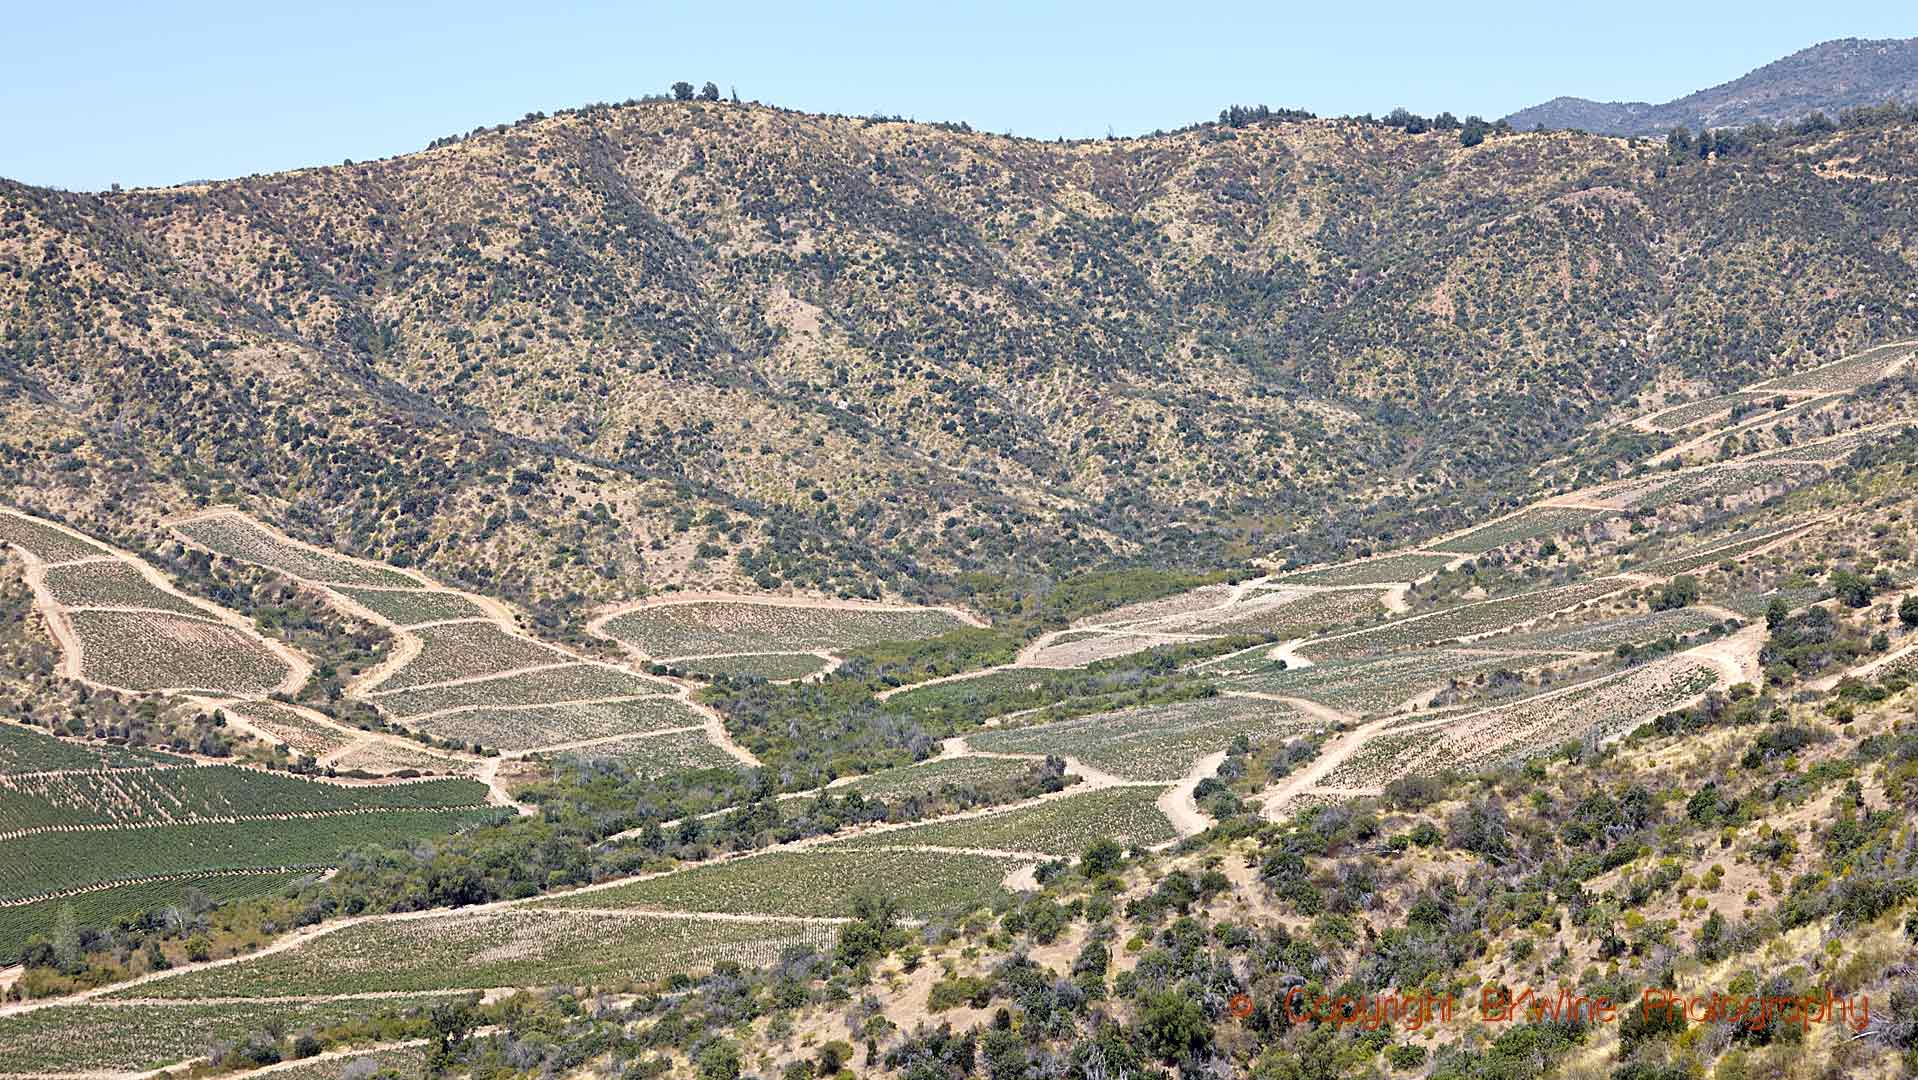 Vineyards on a mountain slope in Colchagua, Chile